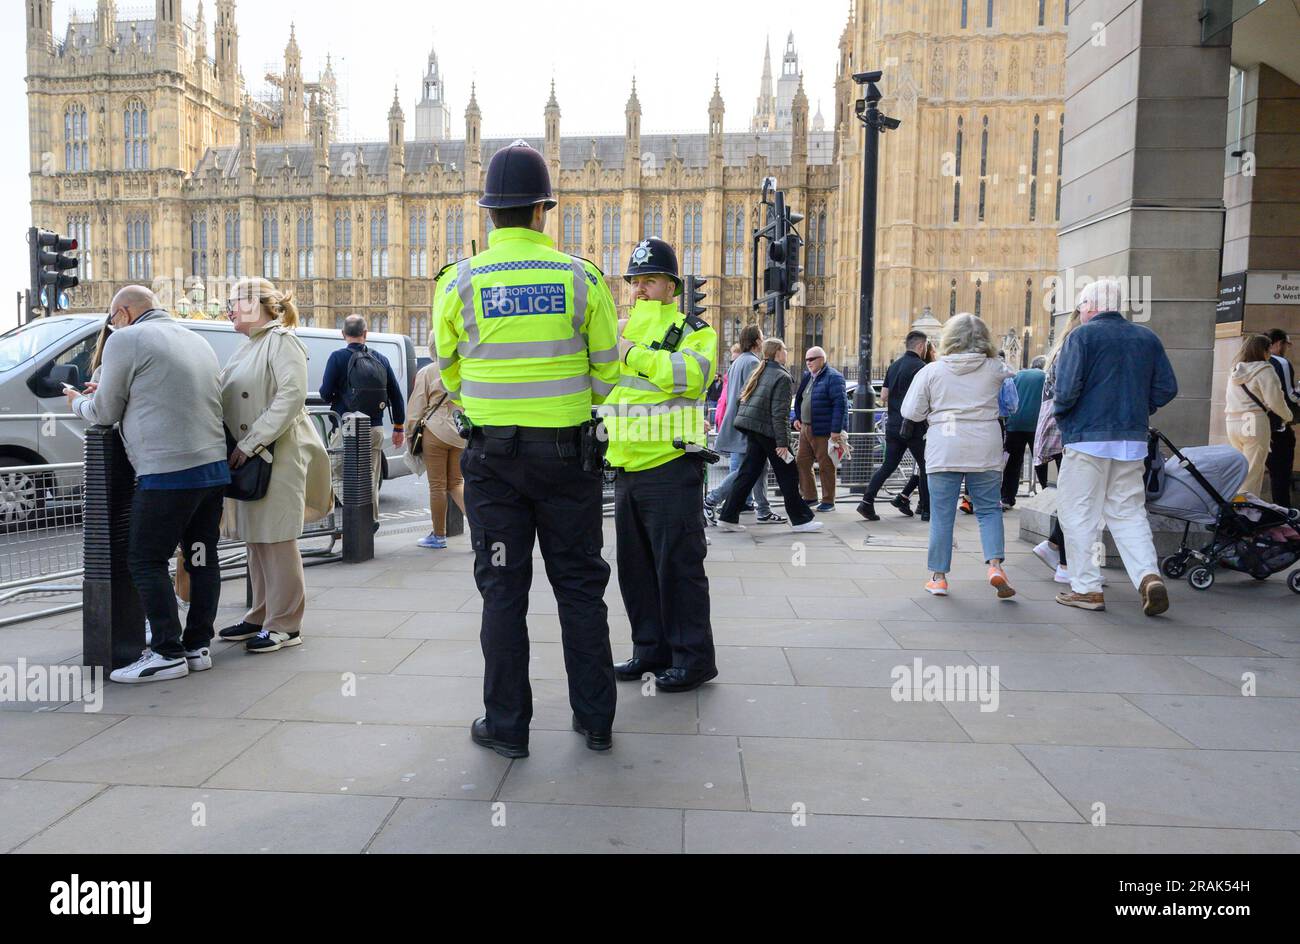 London, UK. Metropolitan Police officers on duty in Westminster by the Houses of Parliament Stock Photo